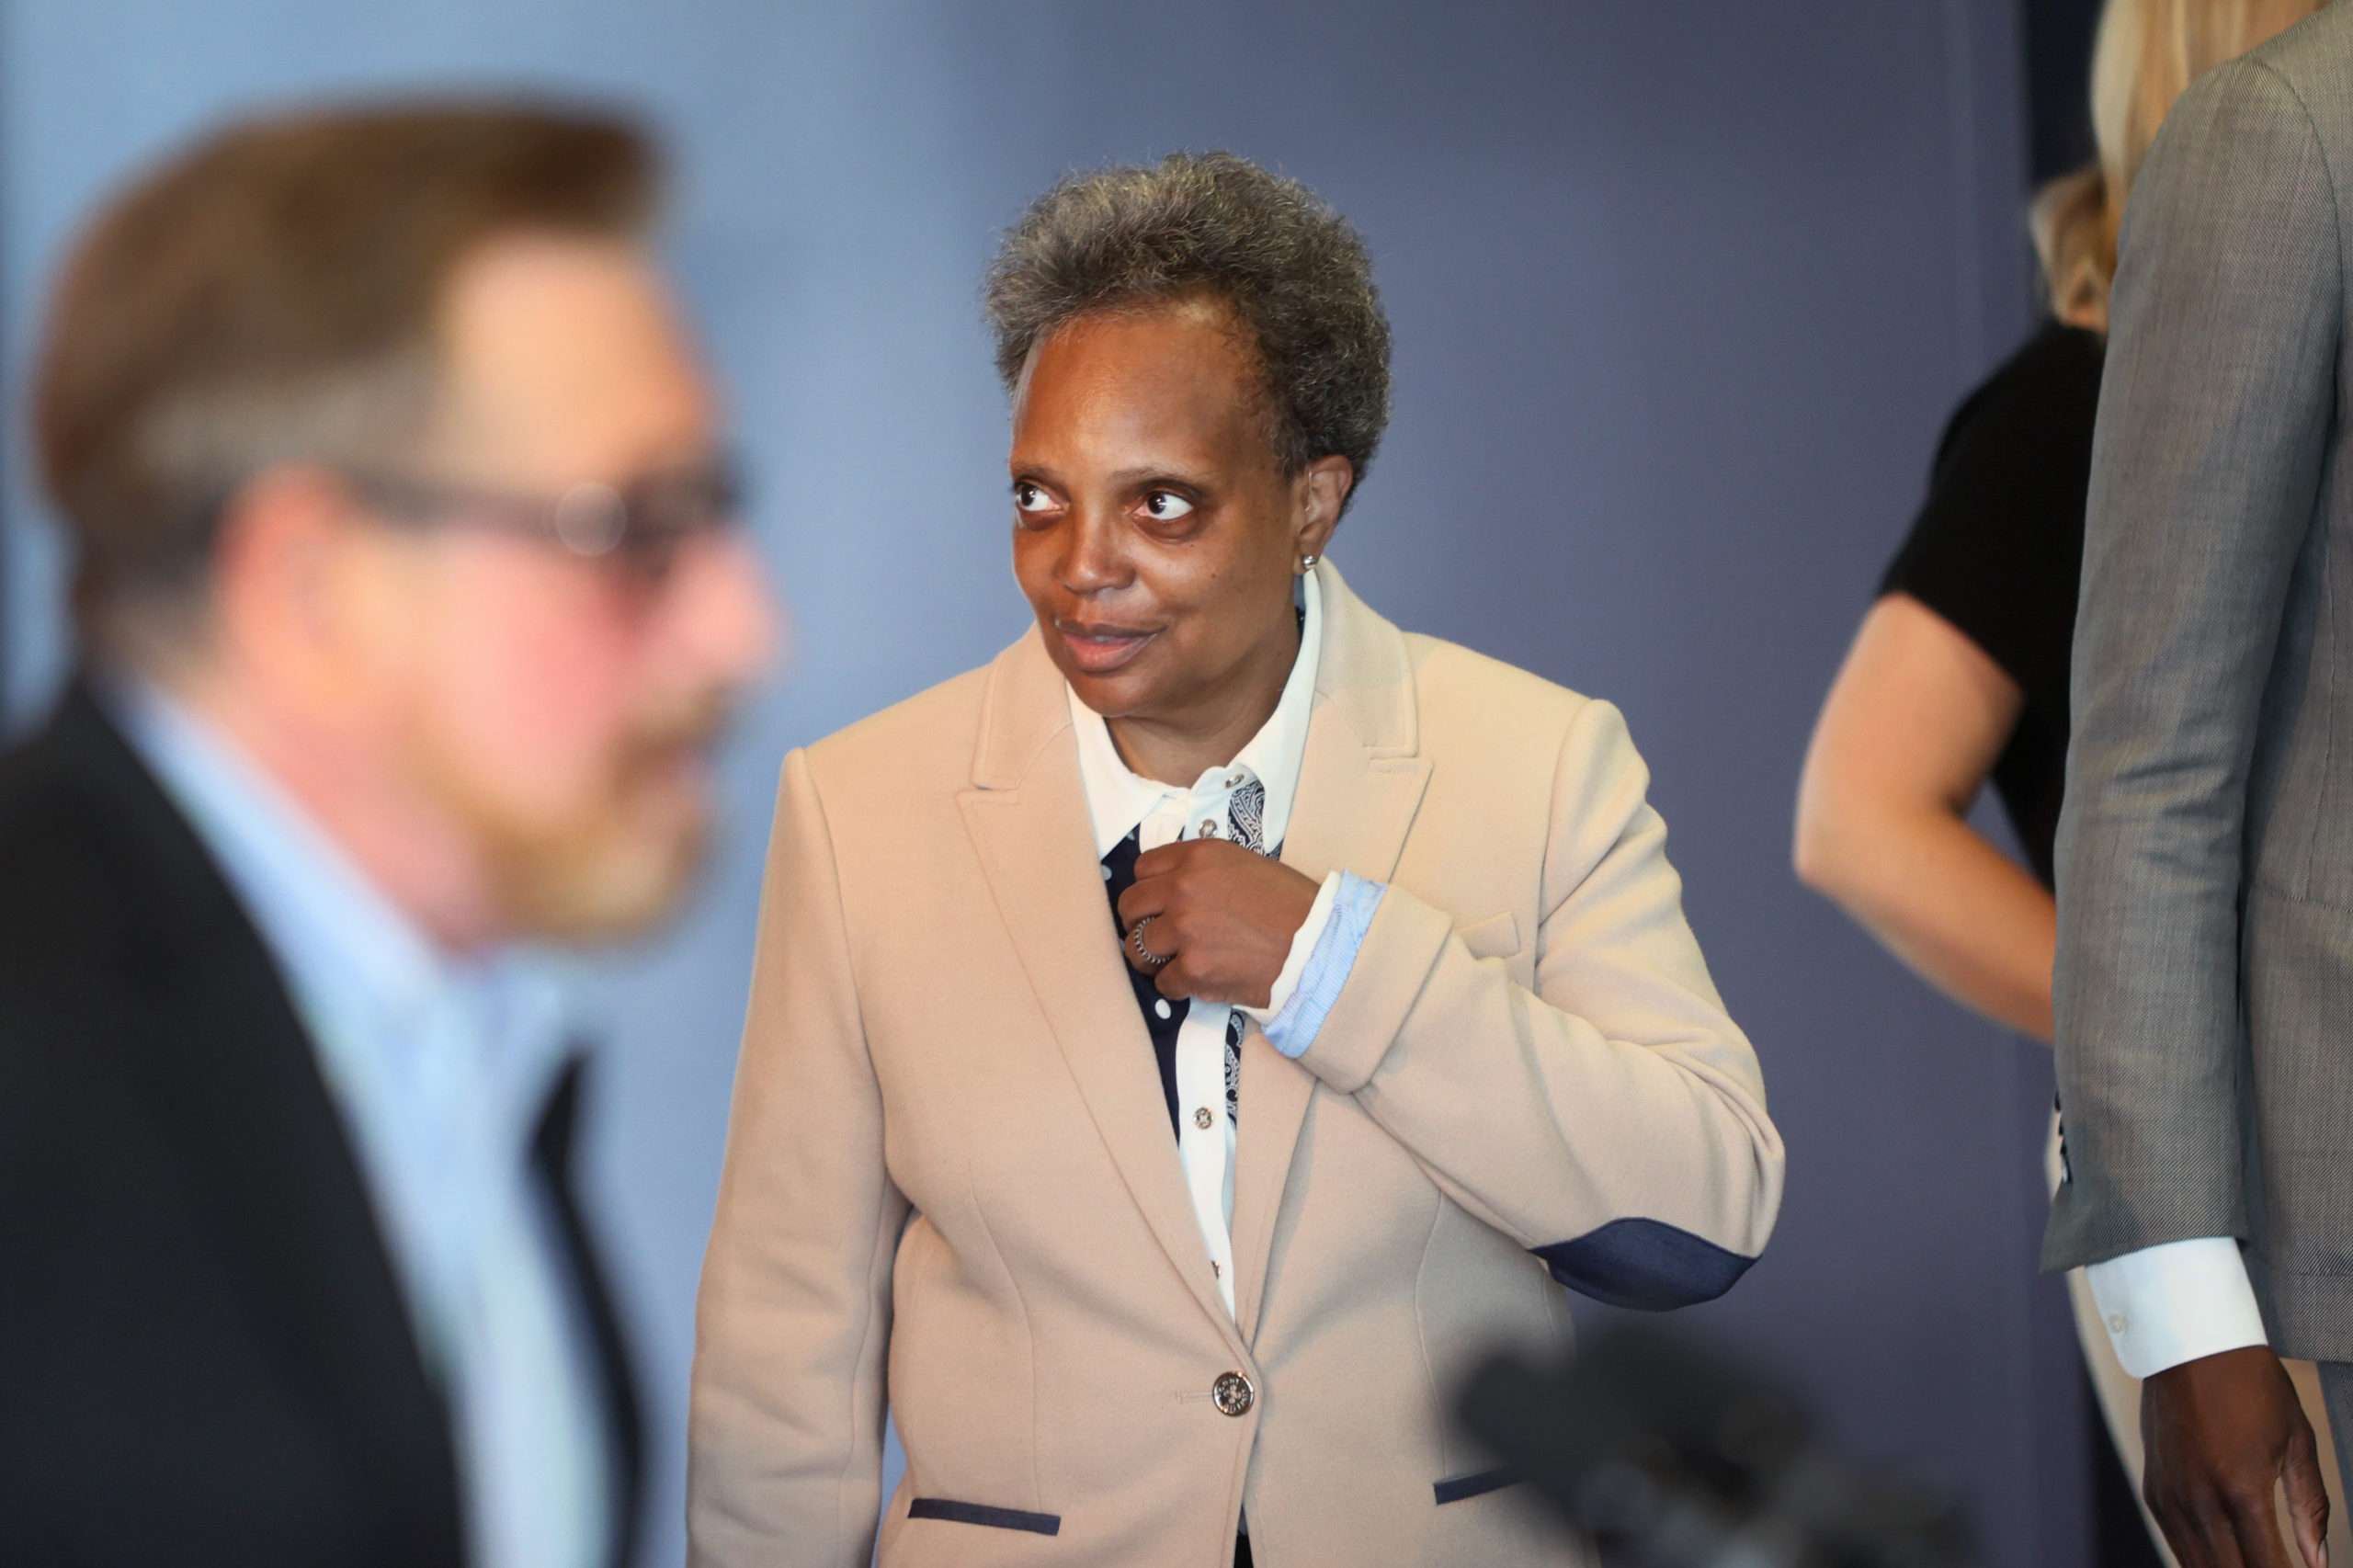 CHICAGO, ILLINOIS - JUNE 07: Chicago Mayor Lori Lightfoot greets guests at an event held to celebrate Pride Month at the Center on Halstead, a lesbian, gay, bisexual, and transgender community center, on (Photo by Scott Olson/Getty Images)